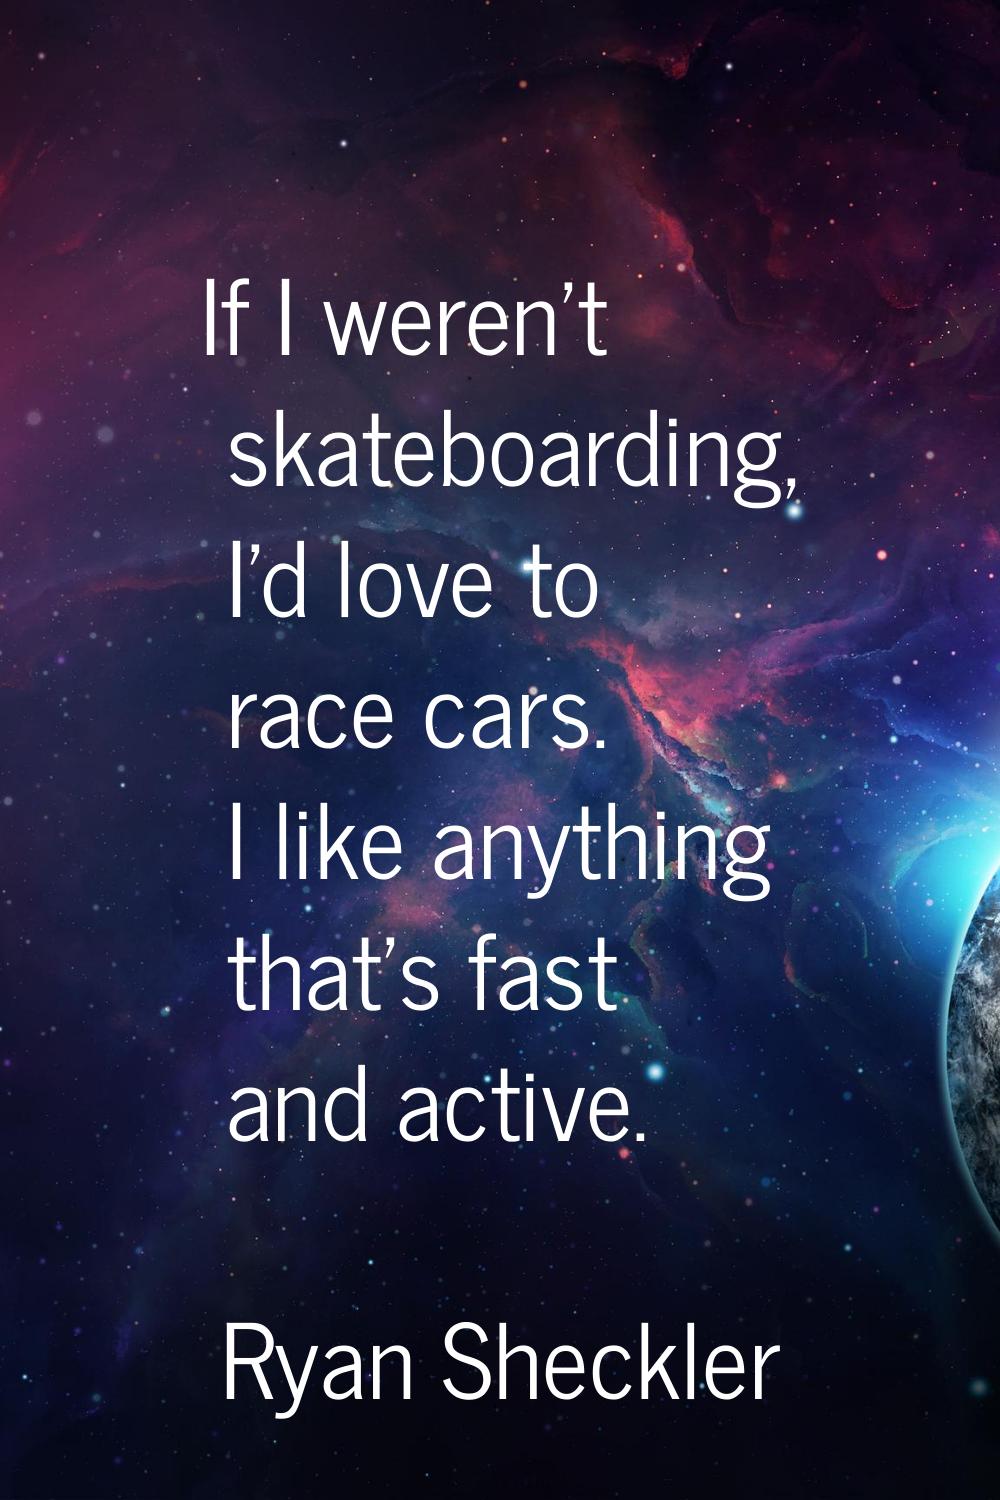 If I weren't skateboarding, I'd love to race cars. I like anything that's fast and active.